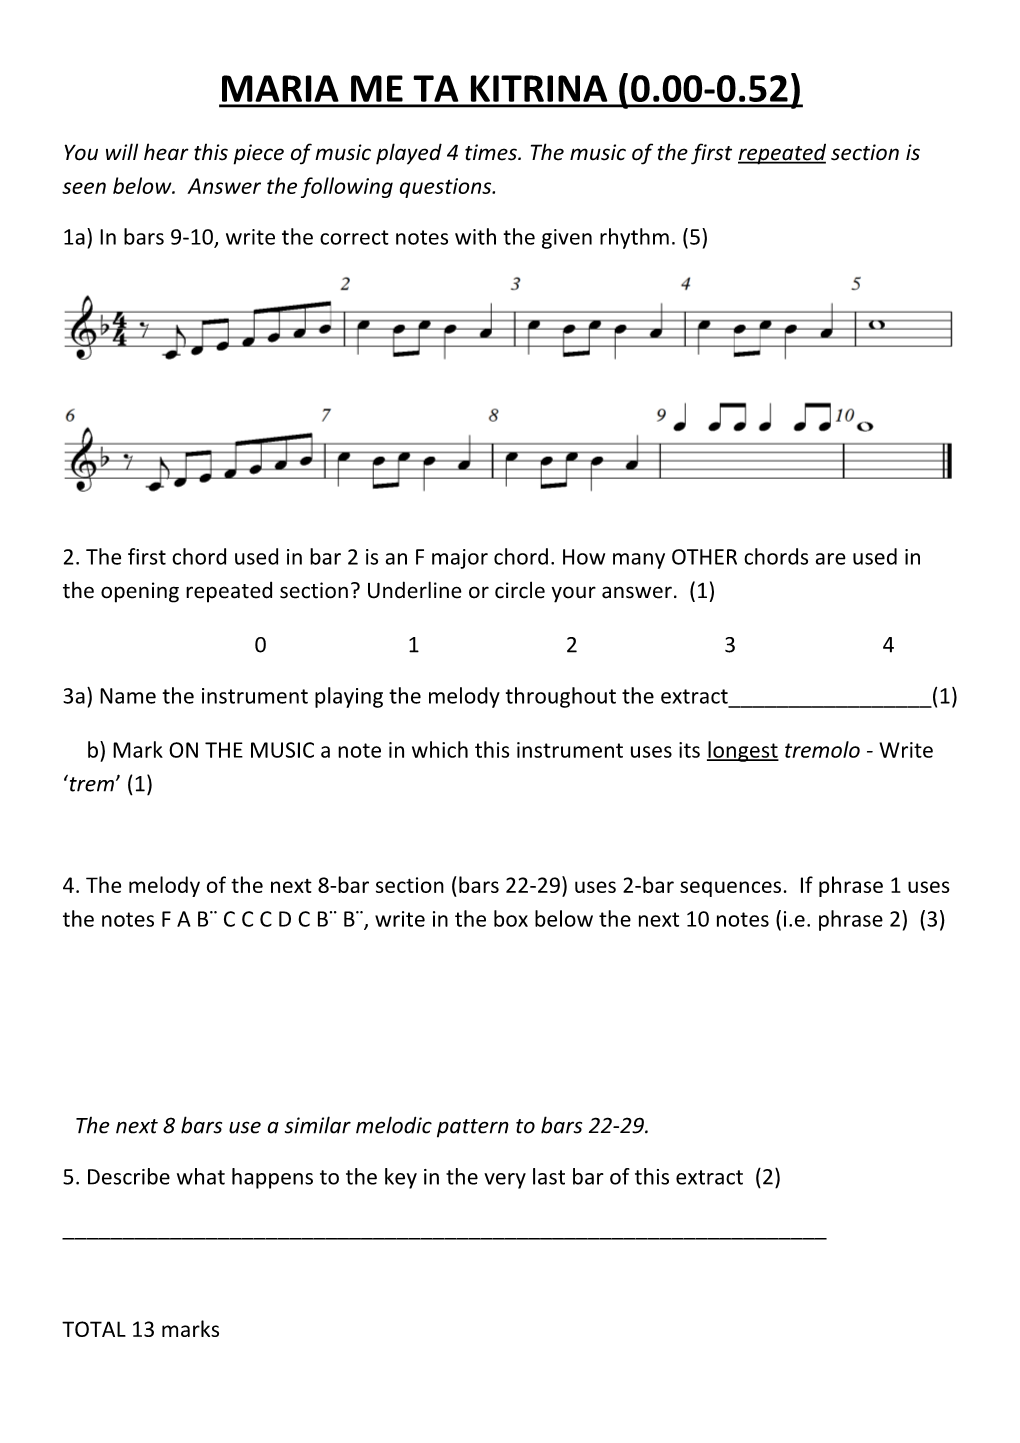 1A) Inbars 9-10, Write the Correct Notes with the Given Rhythm. (5)